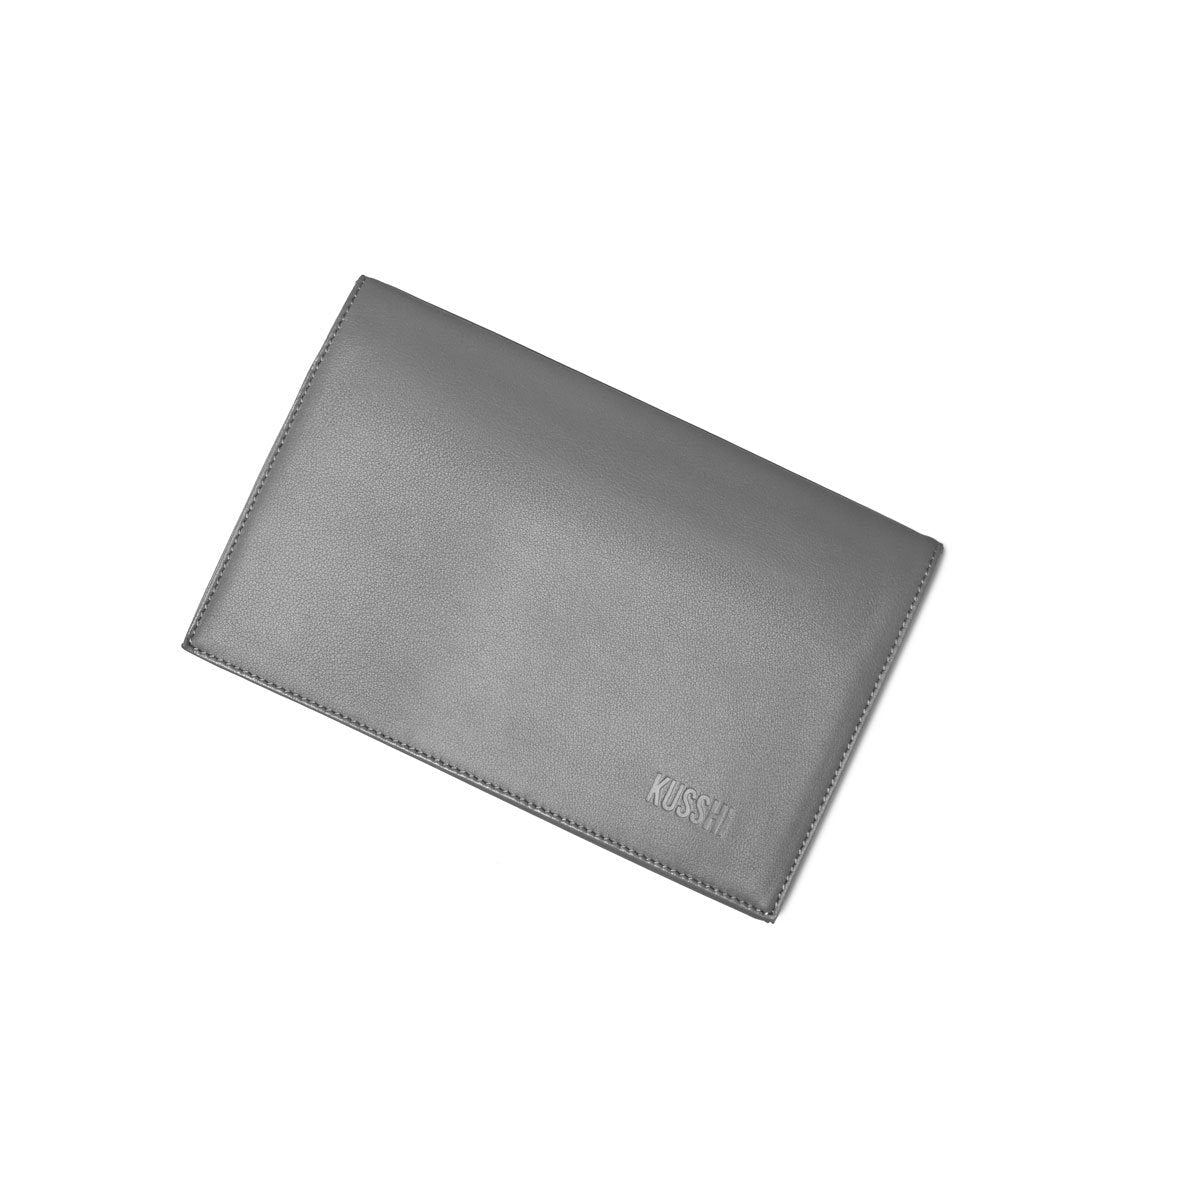 Grey Leather Cover| KUSSHI